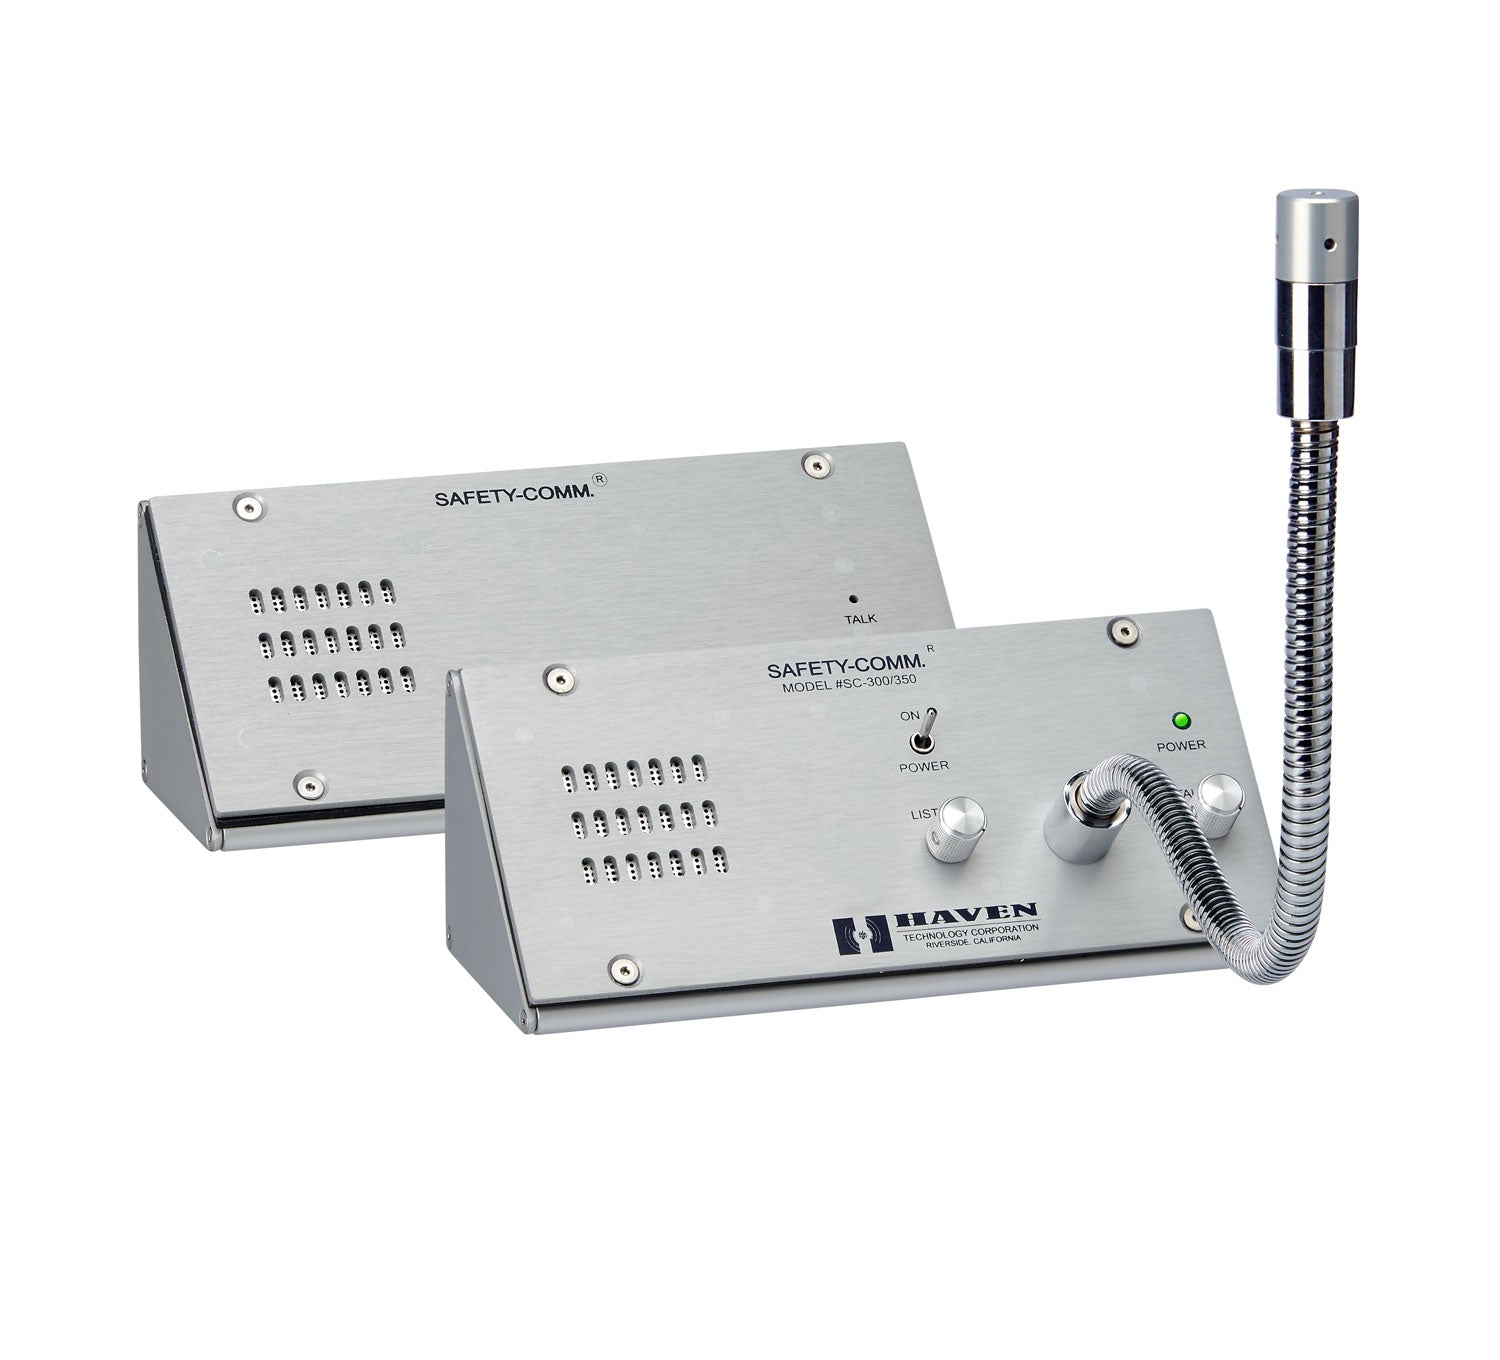 Safety-Comm SC-300 Amplified Counter Mounted Window Intercom. No window hole required.